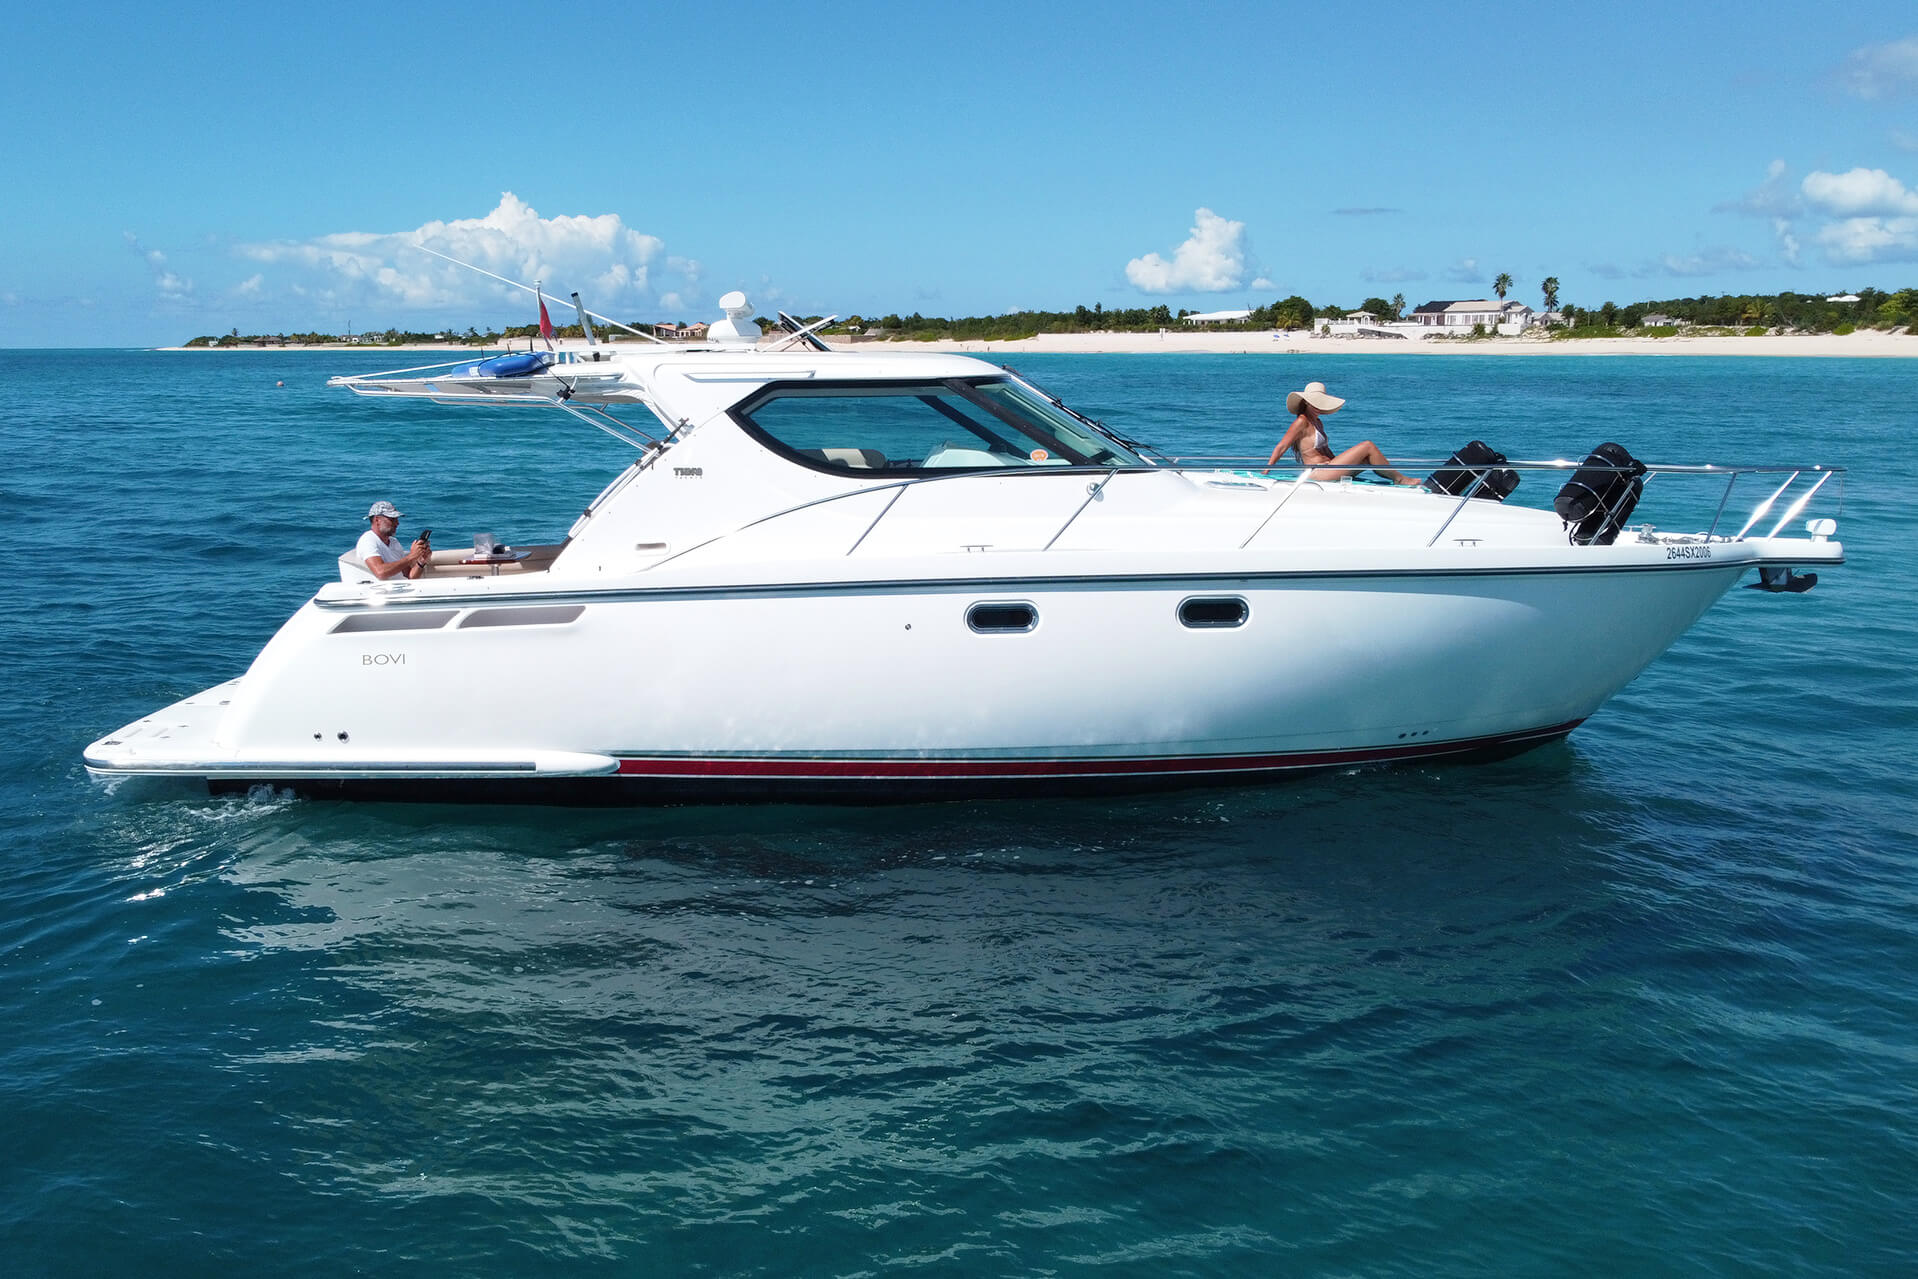 The Tiara 45 is an elegantly designed yacht, with clean lines.